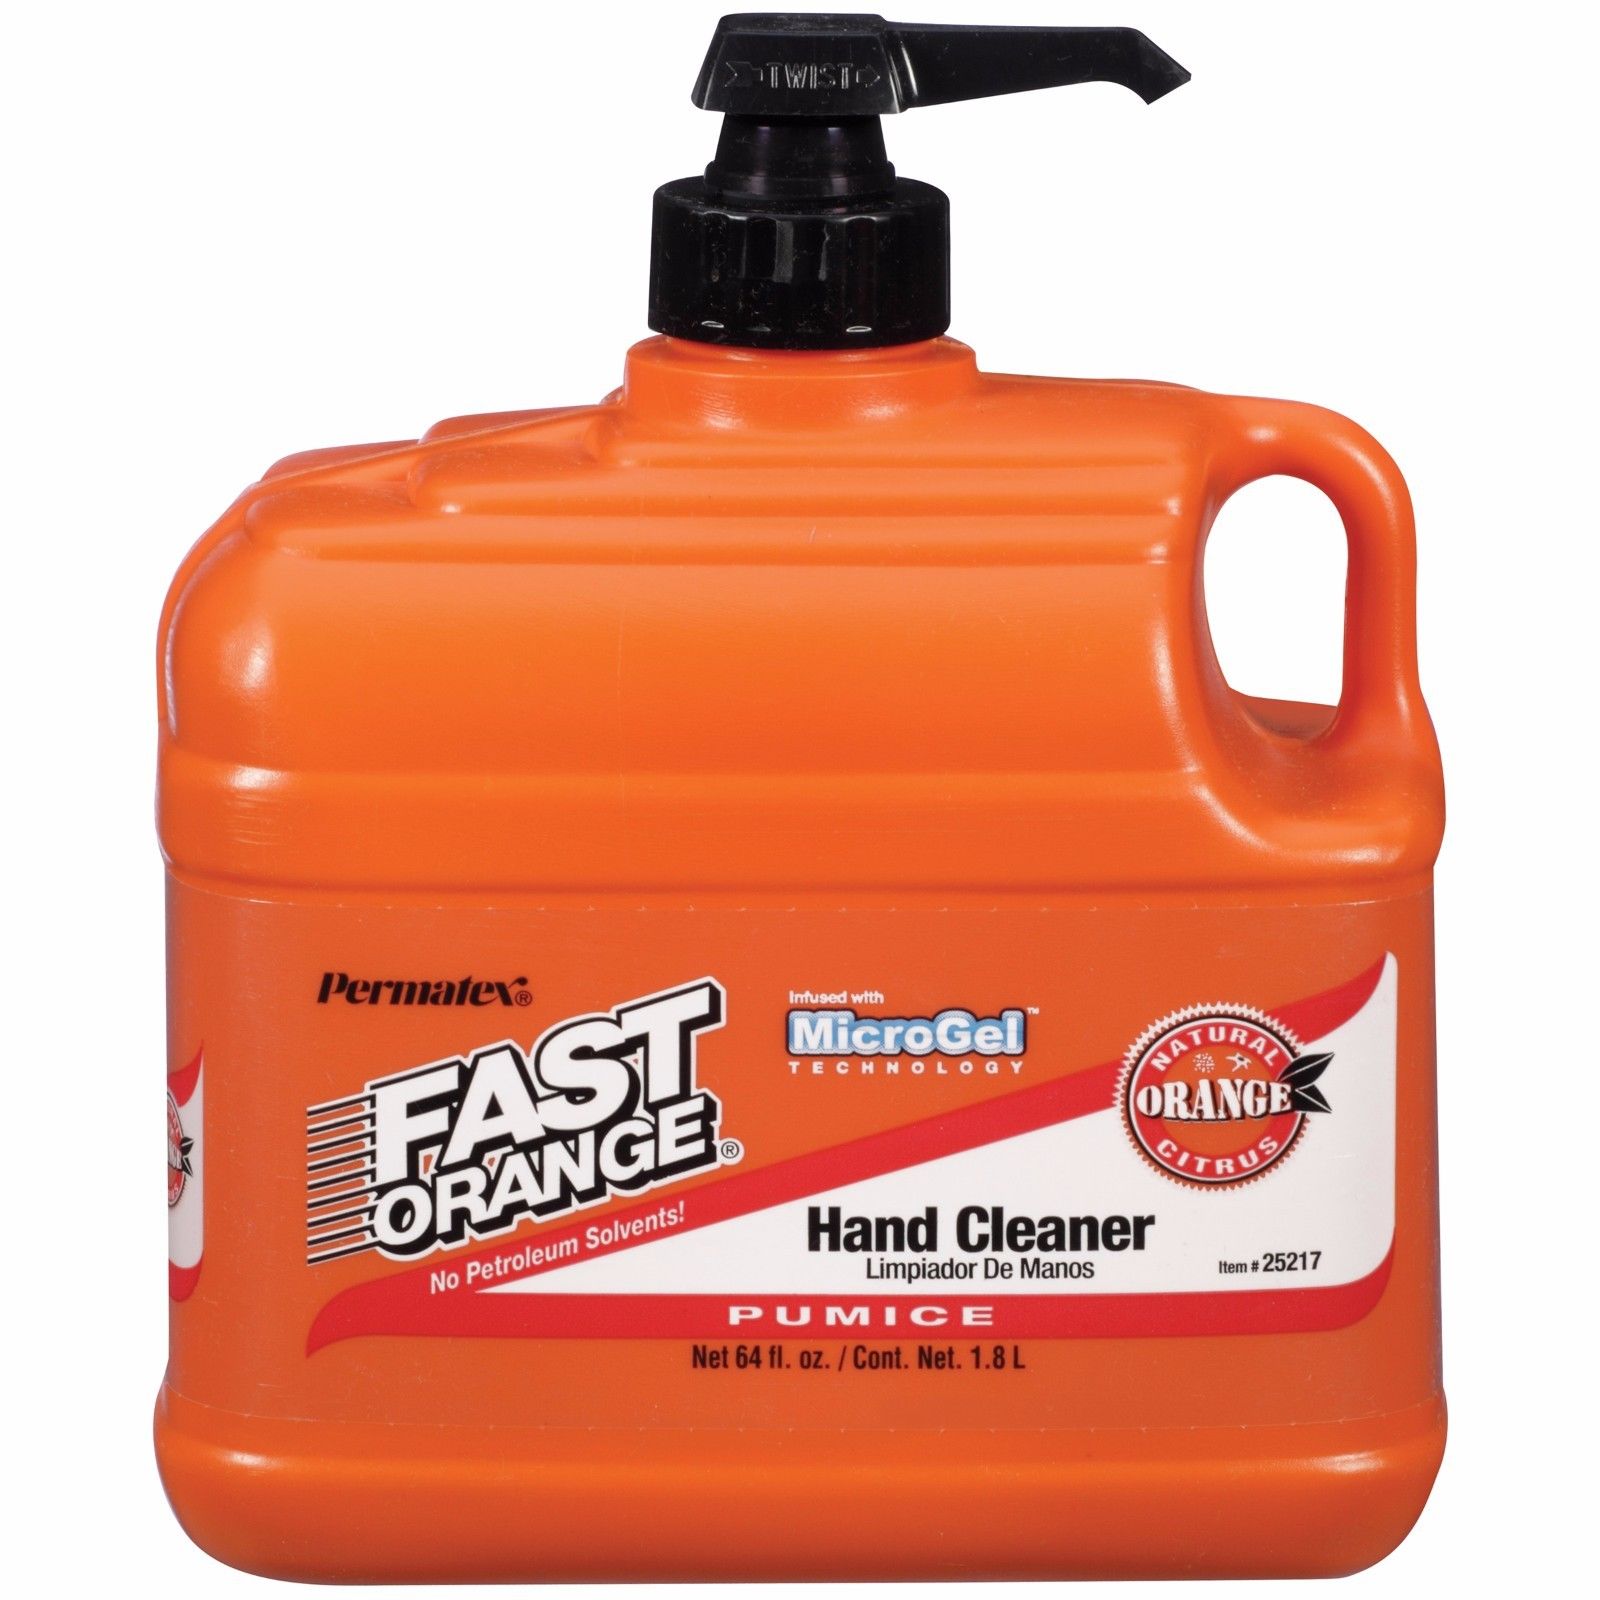 Permatex Fast Orange Fine Pumice Lotion Hand Cleaner (64 oz) ONLY $7.99!